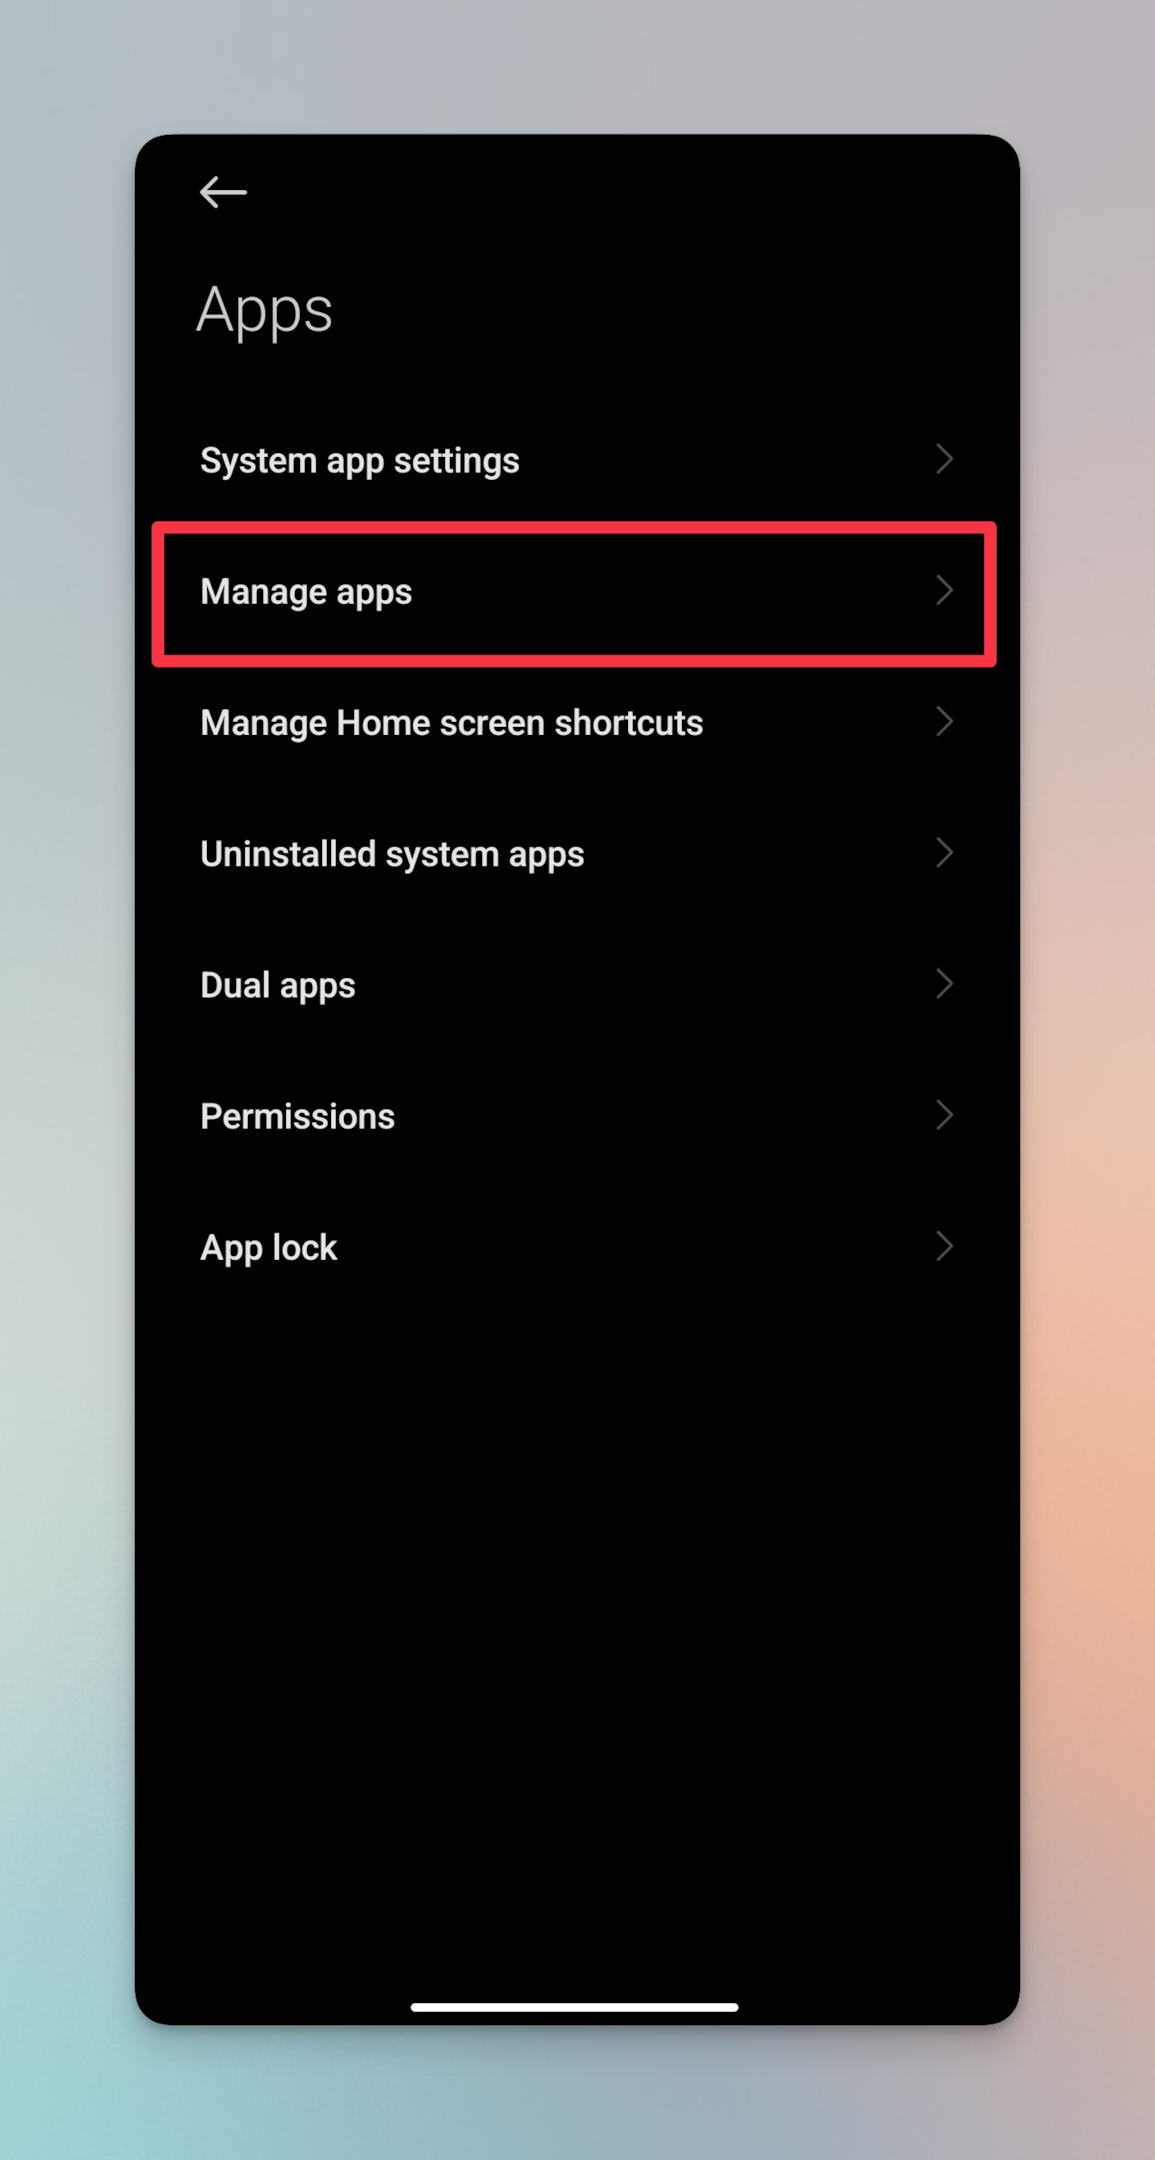 Remote.tools highlights "Manage apps" to access snapchat settings related to location.